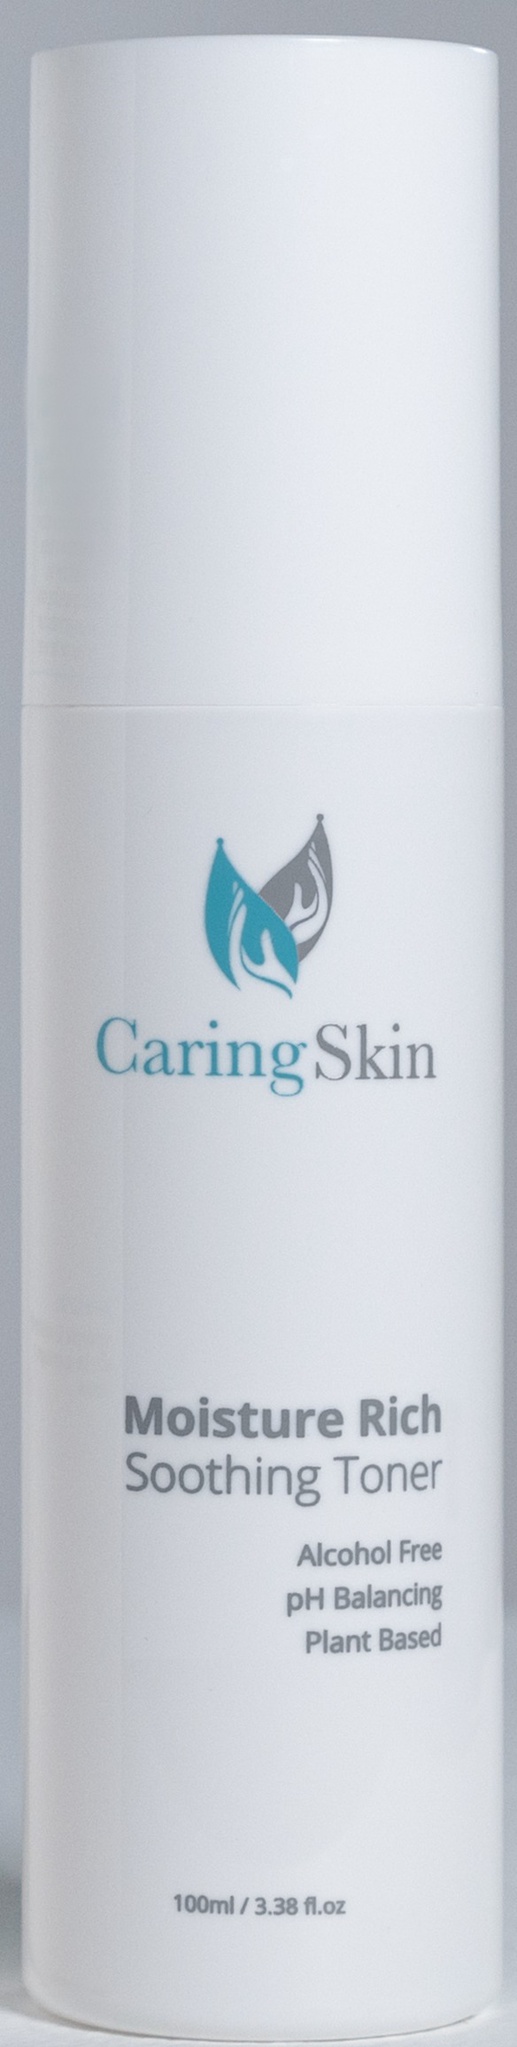 Caring Skin Moisture Rich Soothing Toner